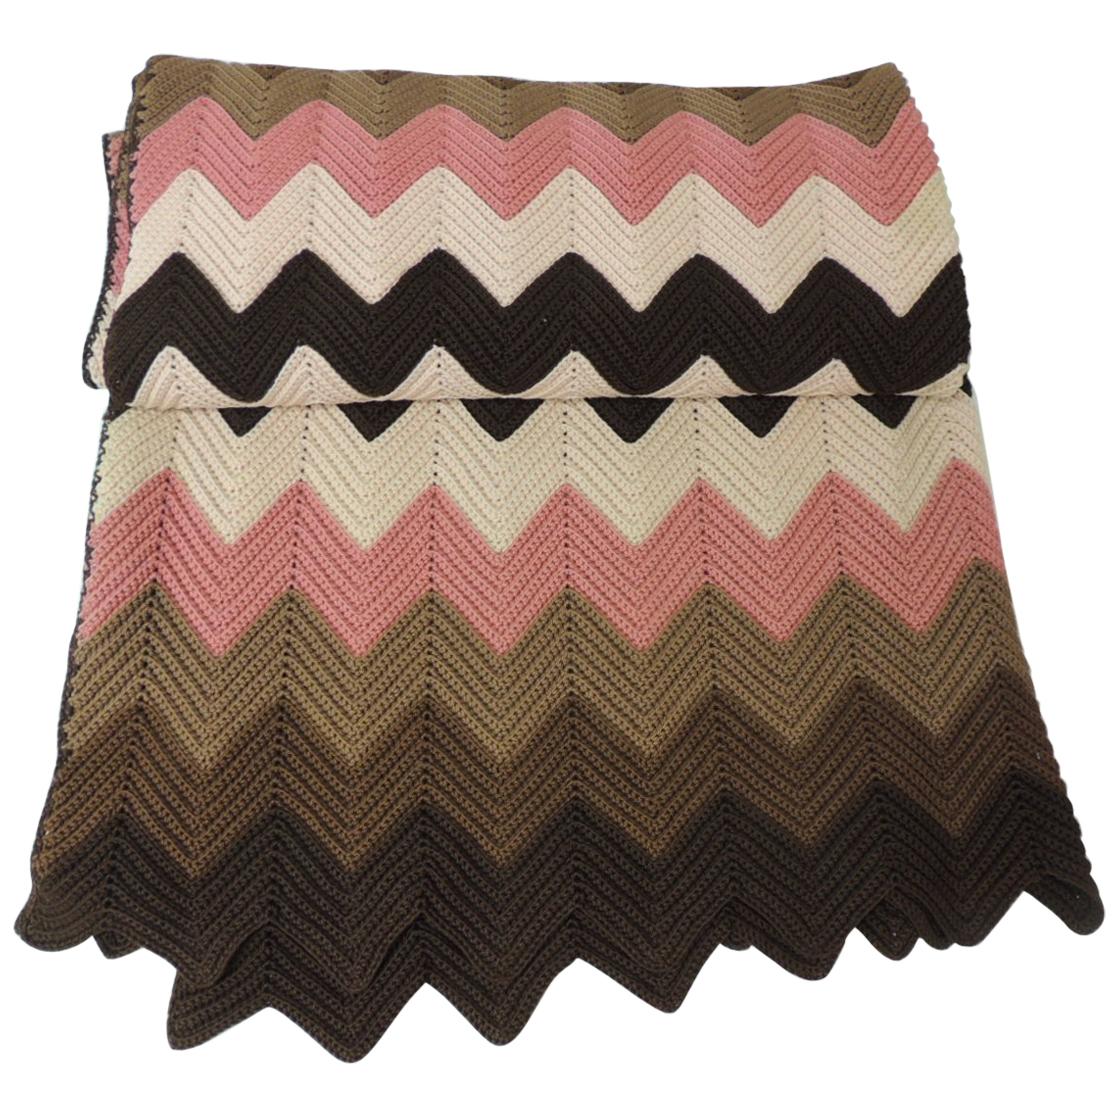 Vintage Pink and Brown Handwoven Crochet Macrame Throw